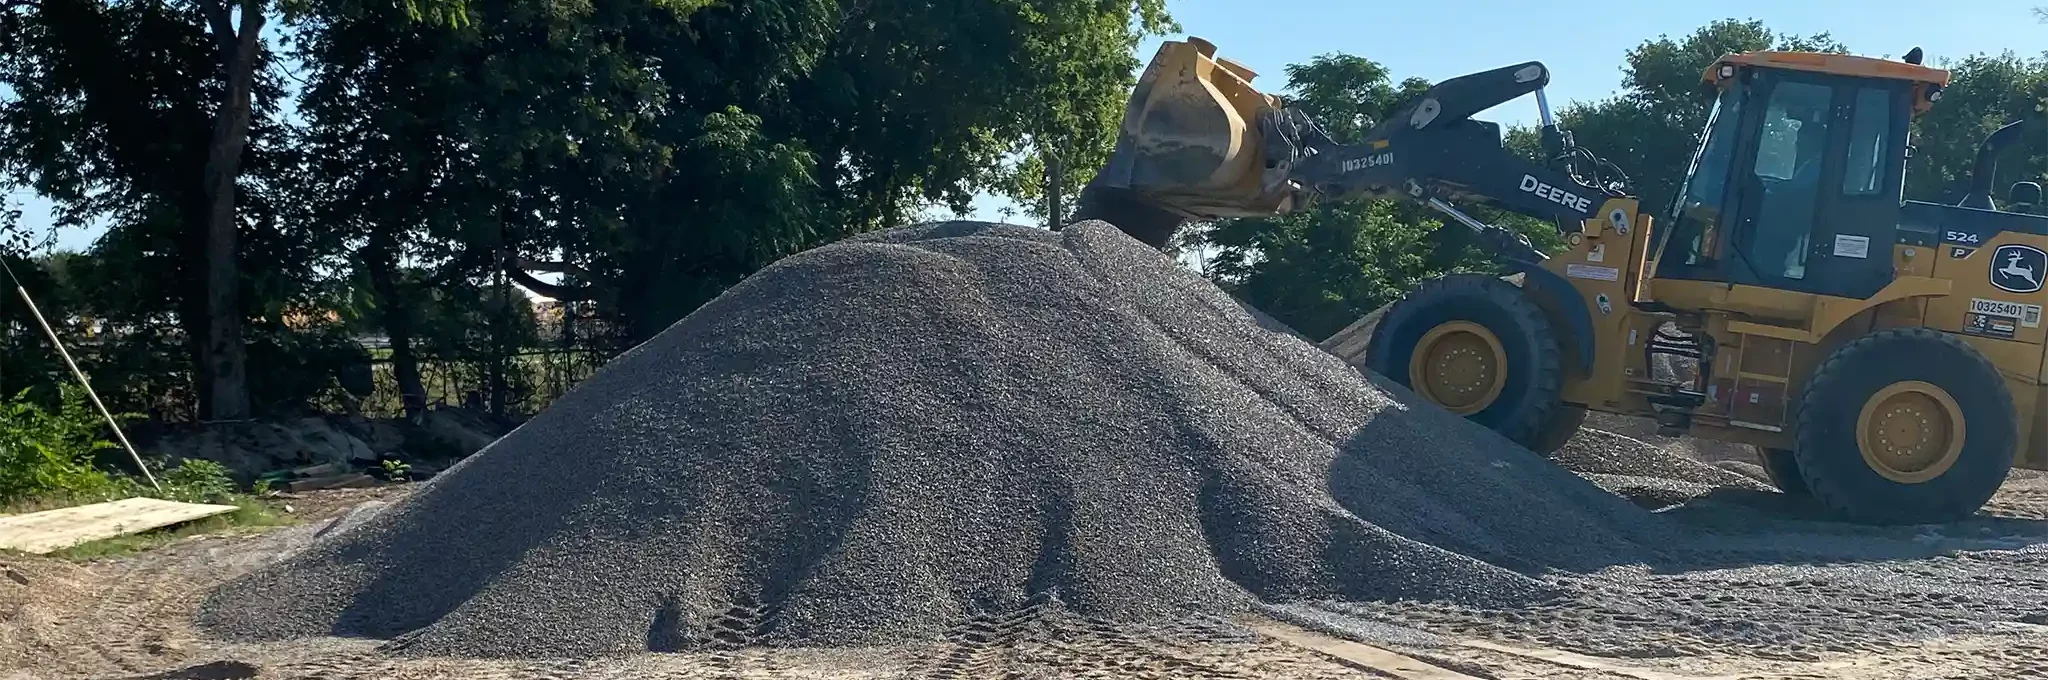 A yellow loader adds to a large pile of 1" utility stone.